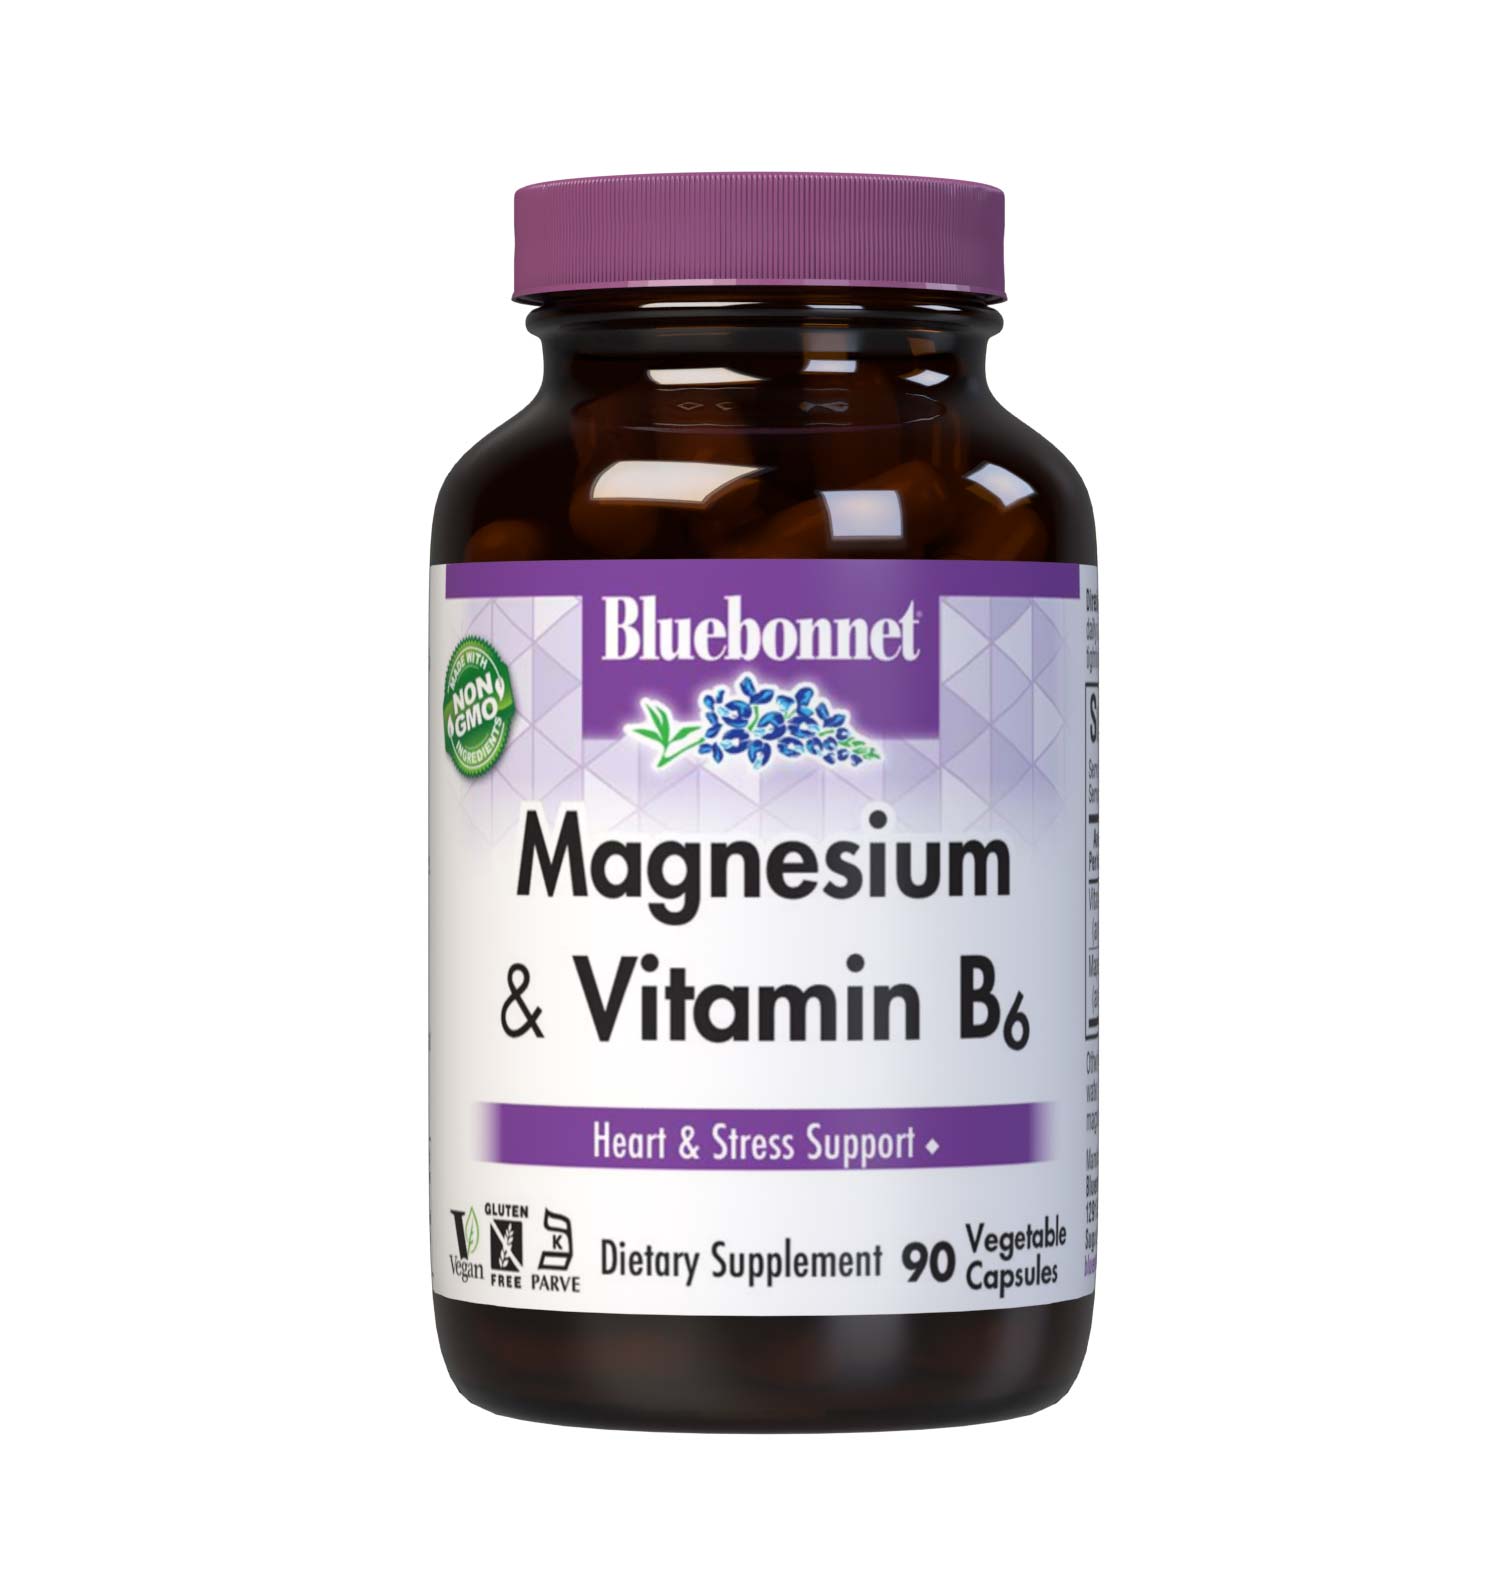 Bluebonnet's Magnesium & Vitamin B6 90 Vegetable Capsules are formulated with reacted magnesium aspartate and magnesium oxide with vitamin B6 to help support heart health and stress relief. #size_90 count